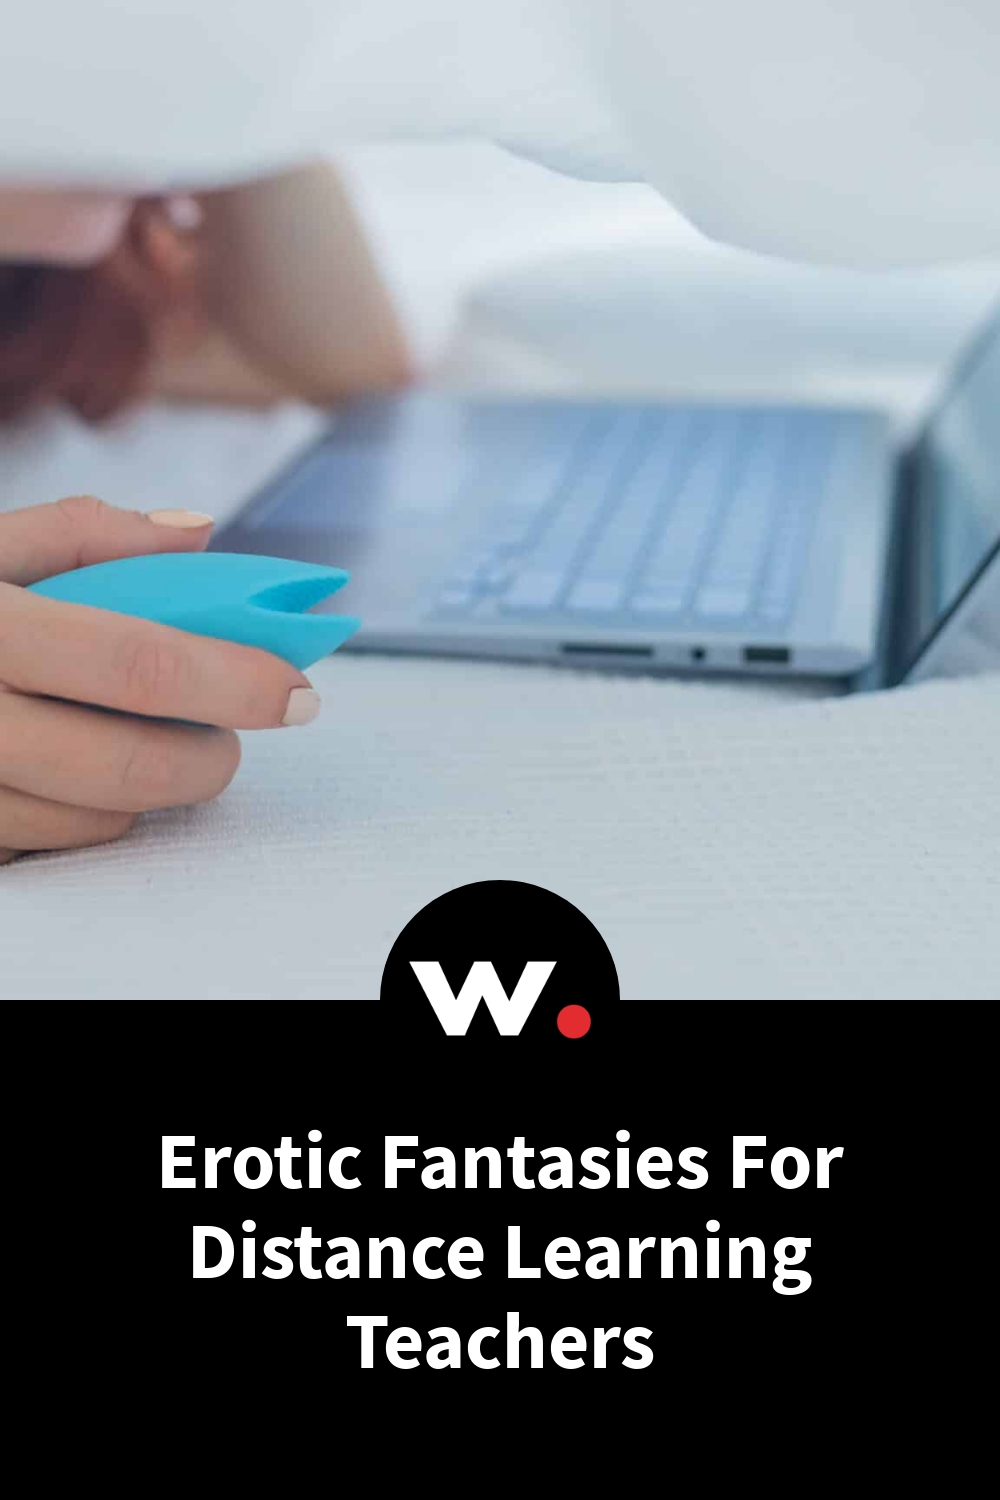 Erotic Fantasies For Distance Learning Teachers